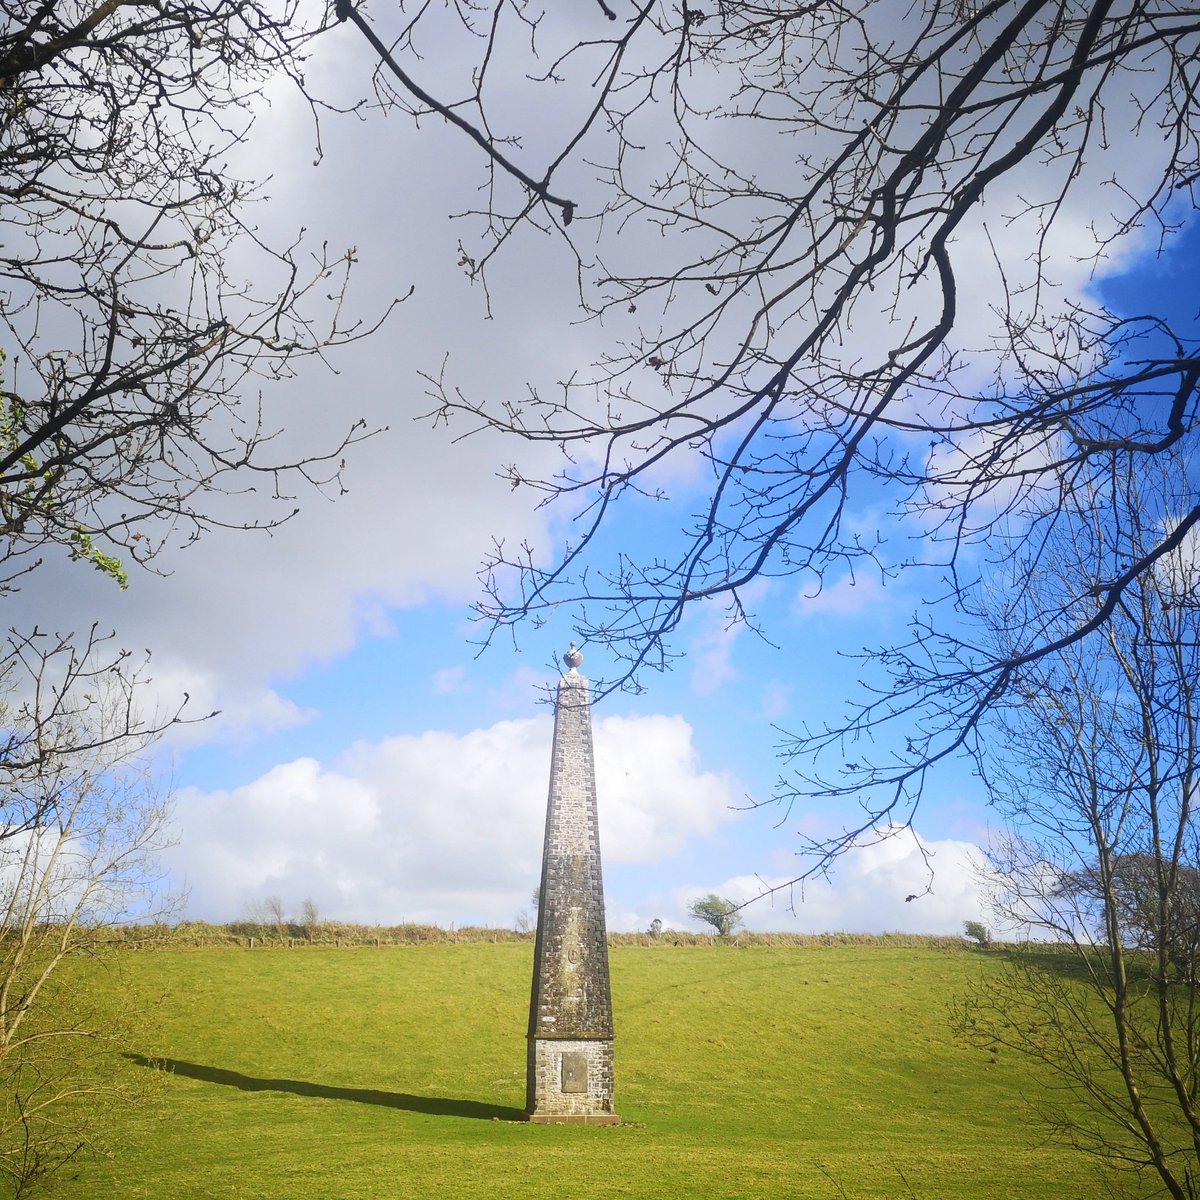 Sunny Moments... #RaheensWood #Obelisk #Castlebar #Mayo @coilltenews #Coillte #ForestsForPeople 🌲🌲🌲